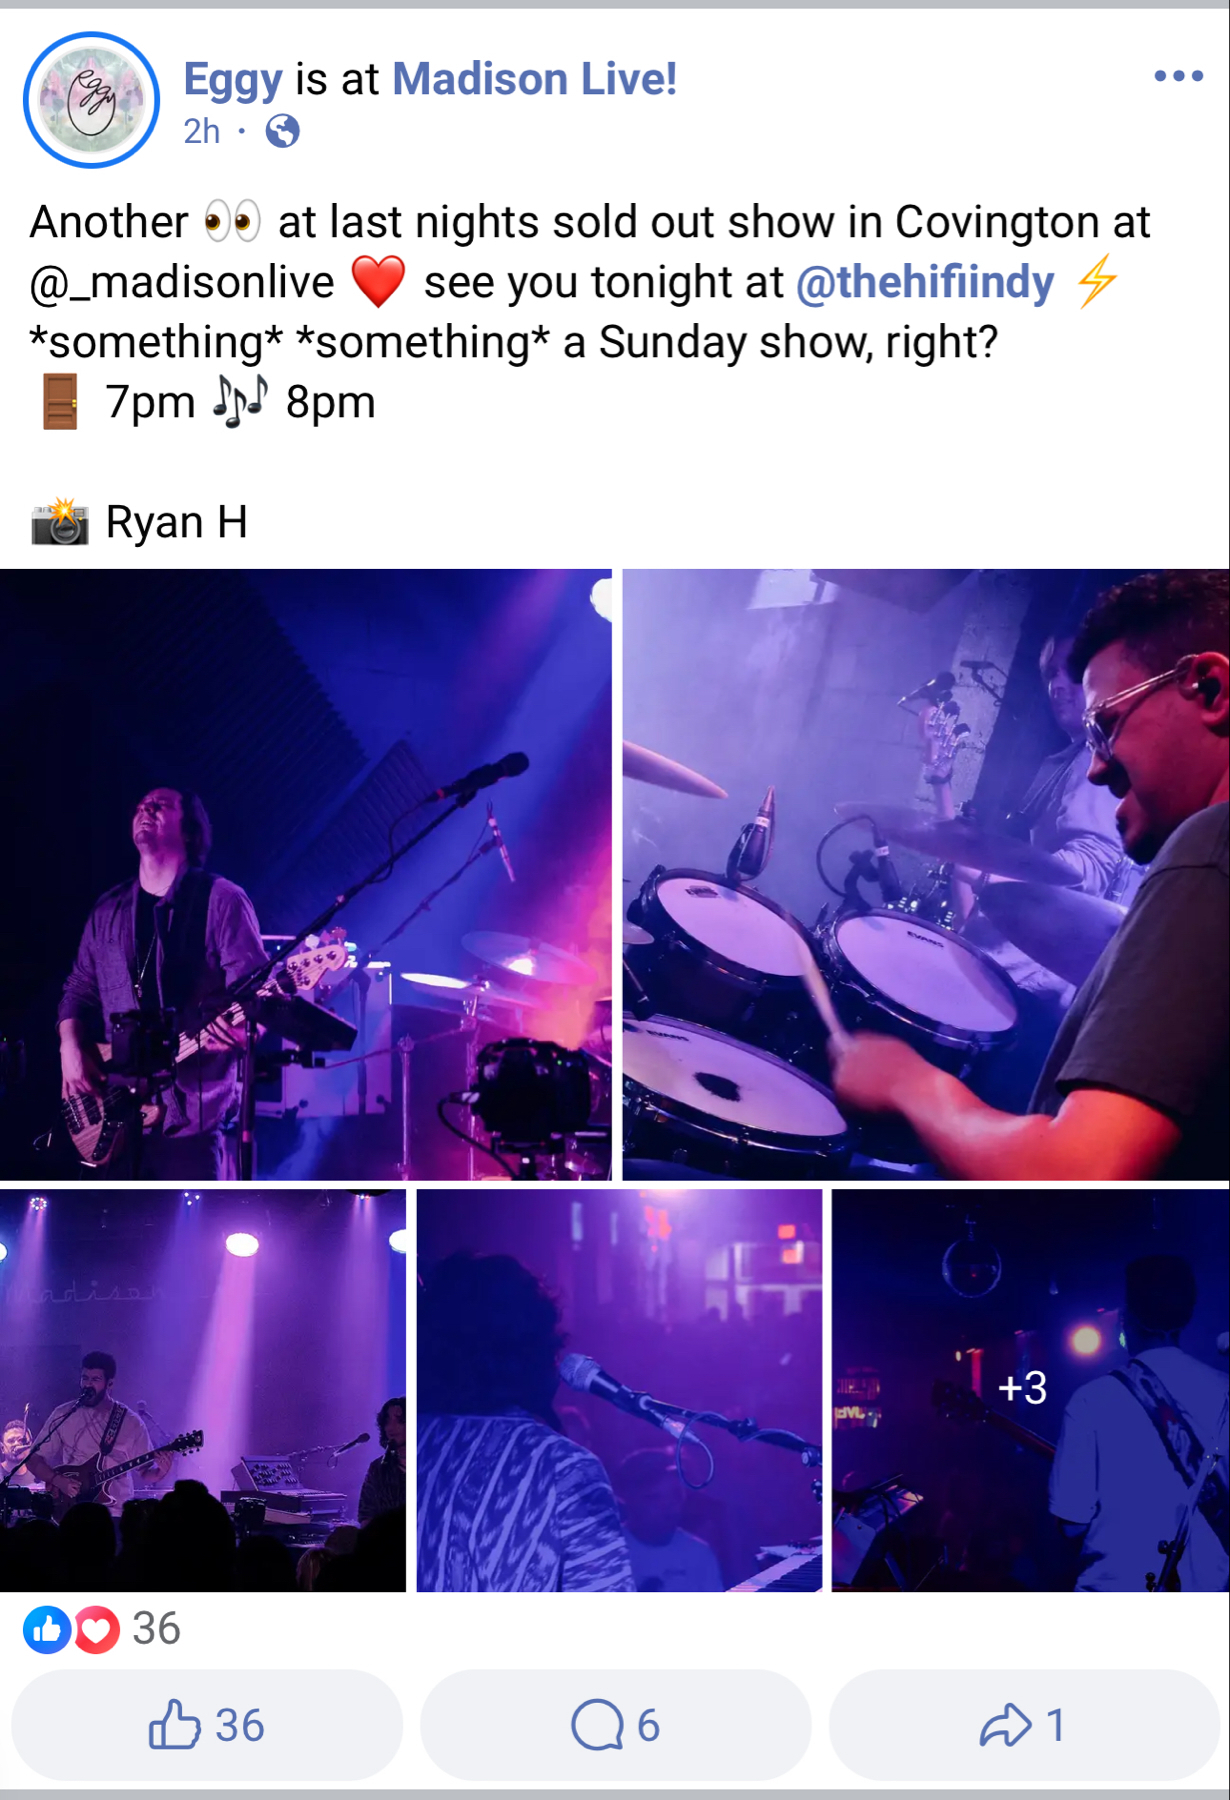 The image displays a collage of photos from a live concert by the band Eggy. The top left photo shows a bass guitarist playing on stage. The top right reveals a drummer in mid-performance. The bottom picture features a view of the lead singer and